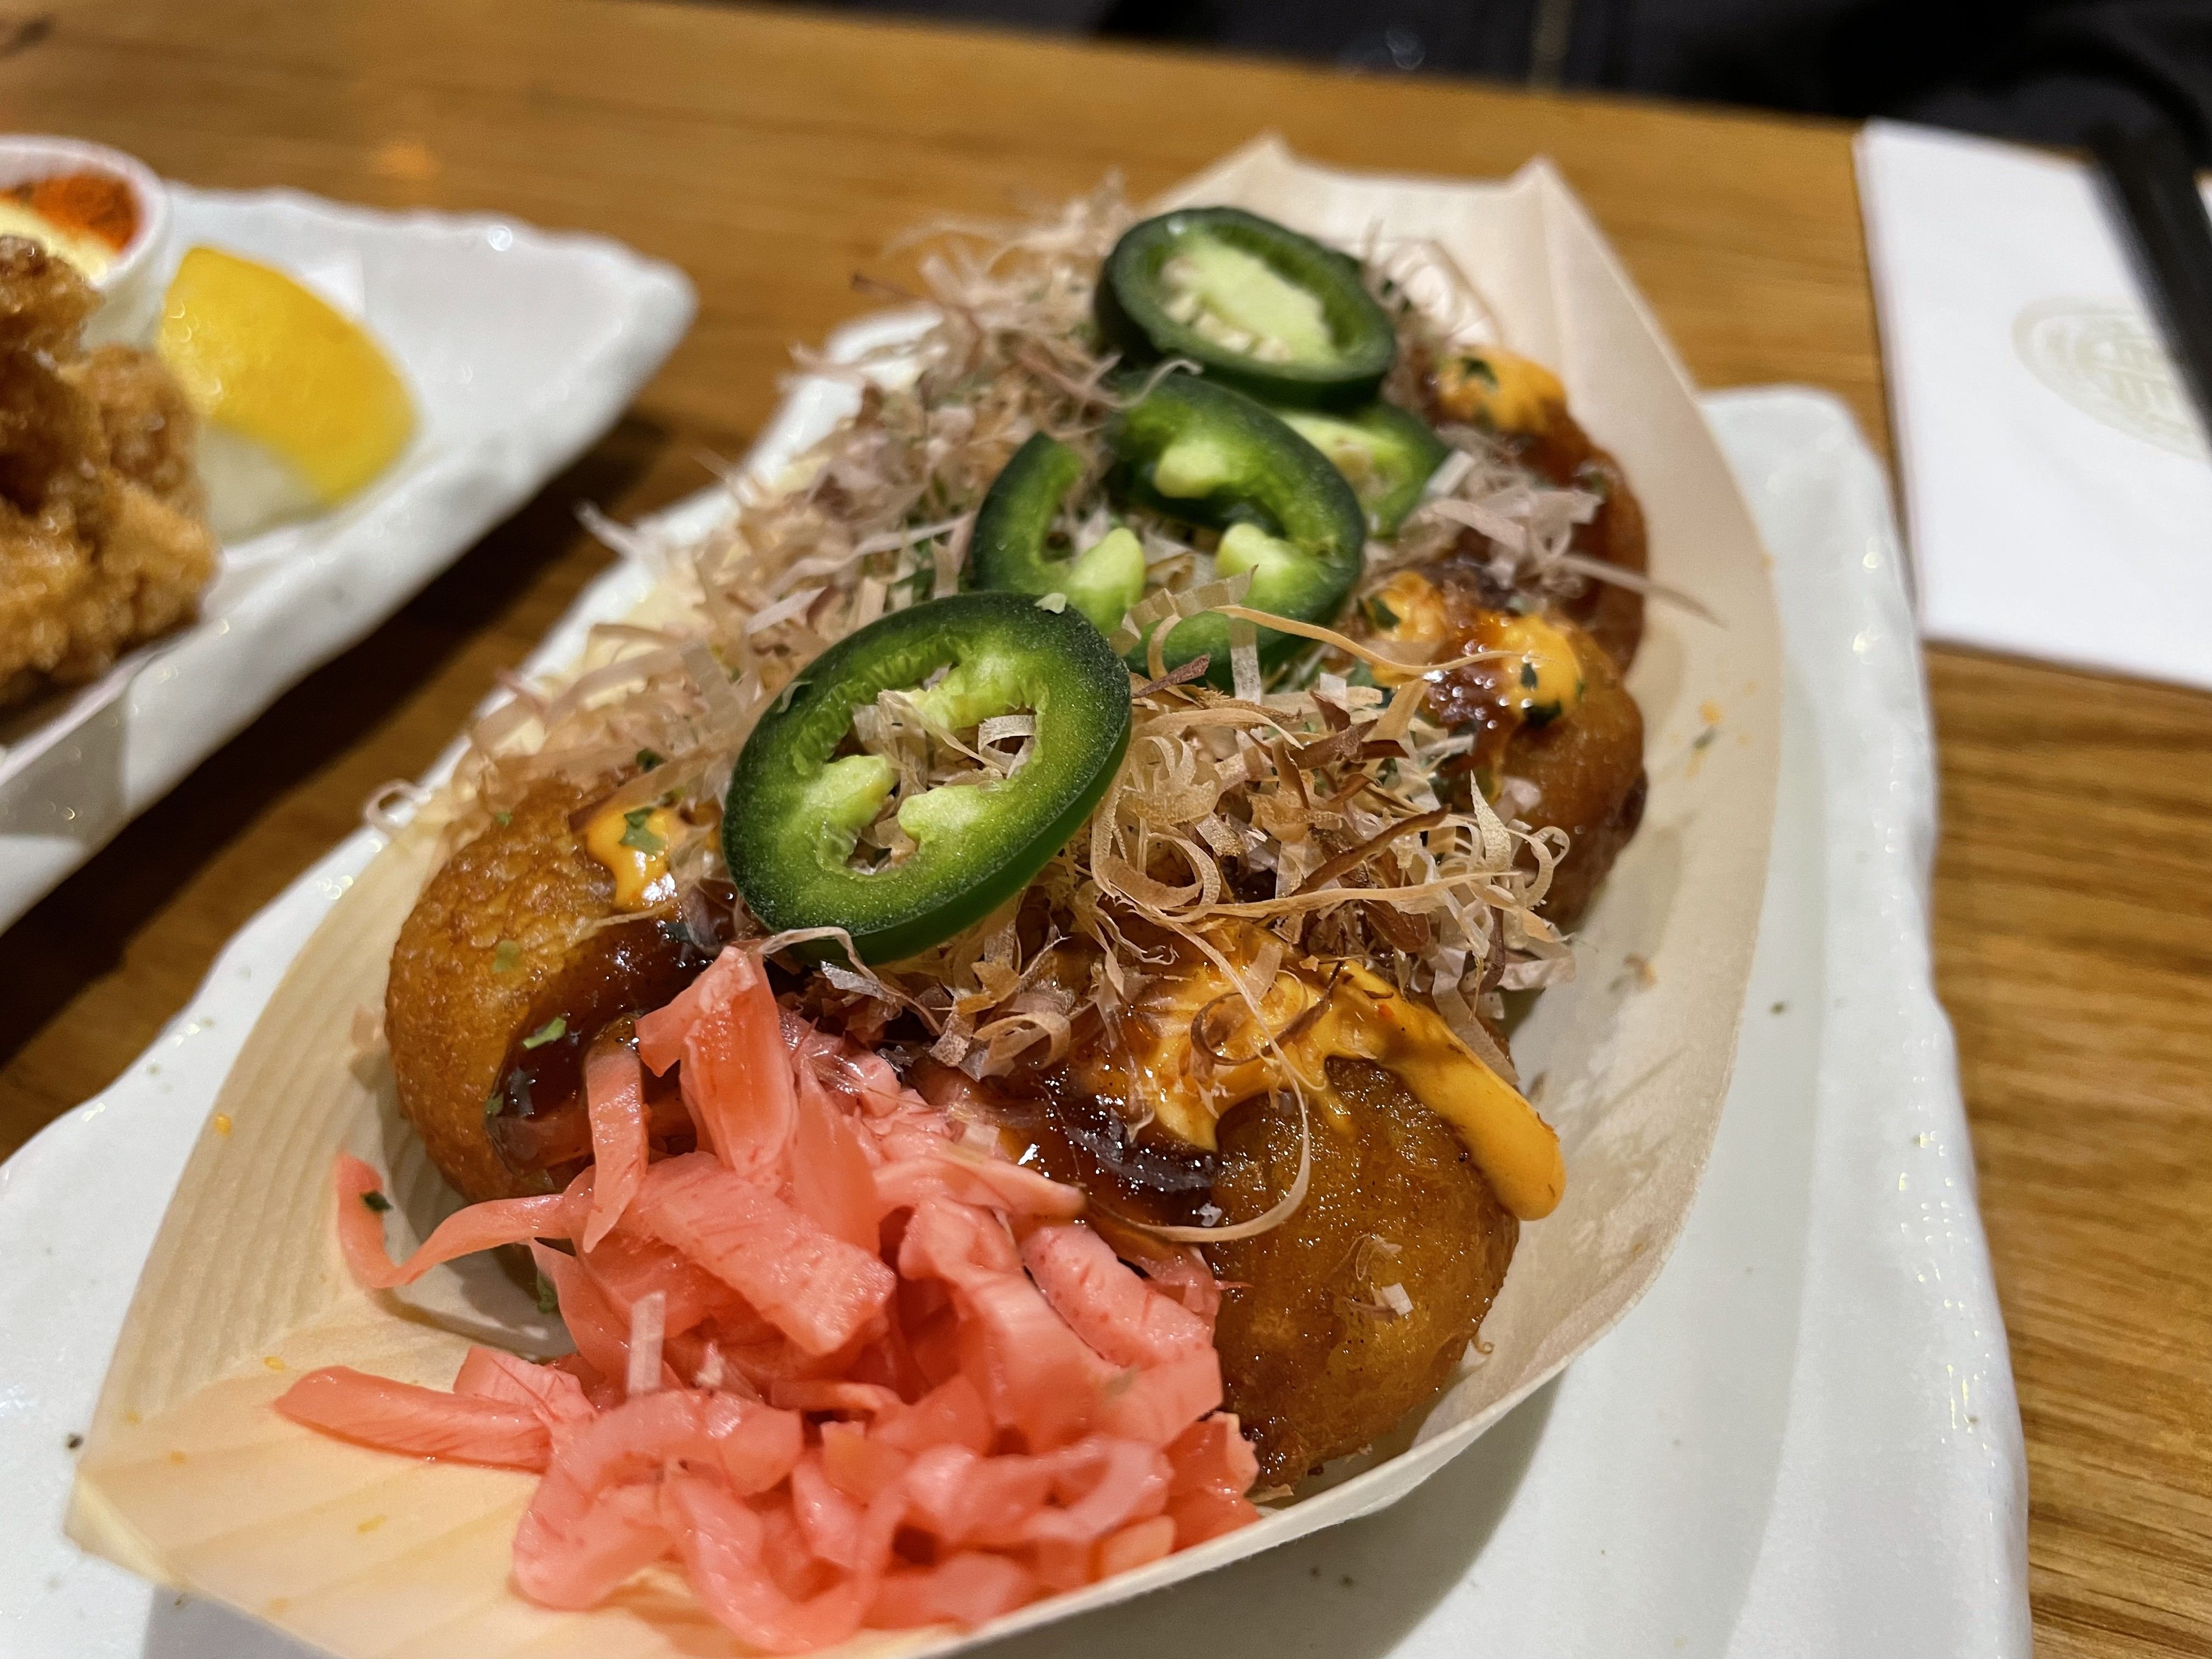 Our 8 piece Takoyaki along side some pickled ginger